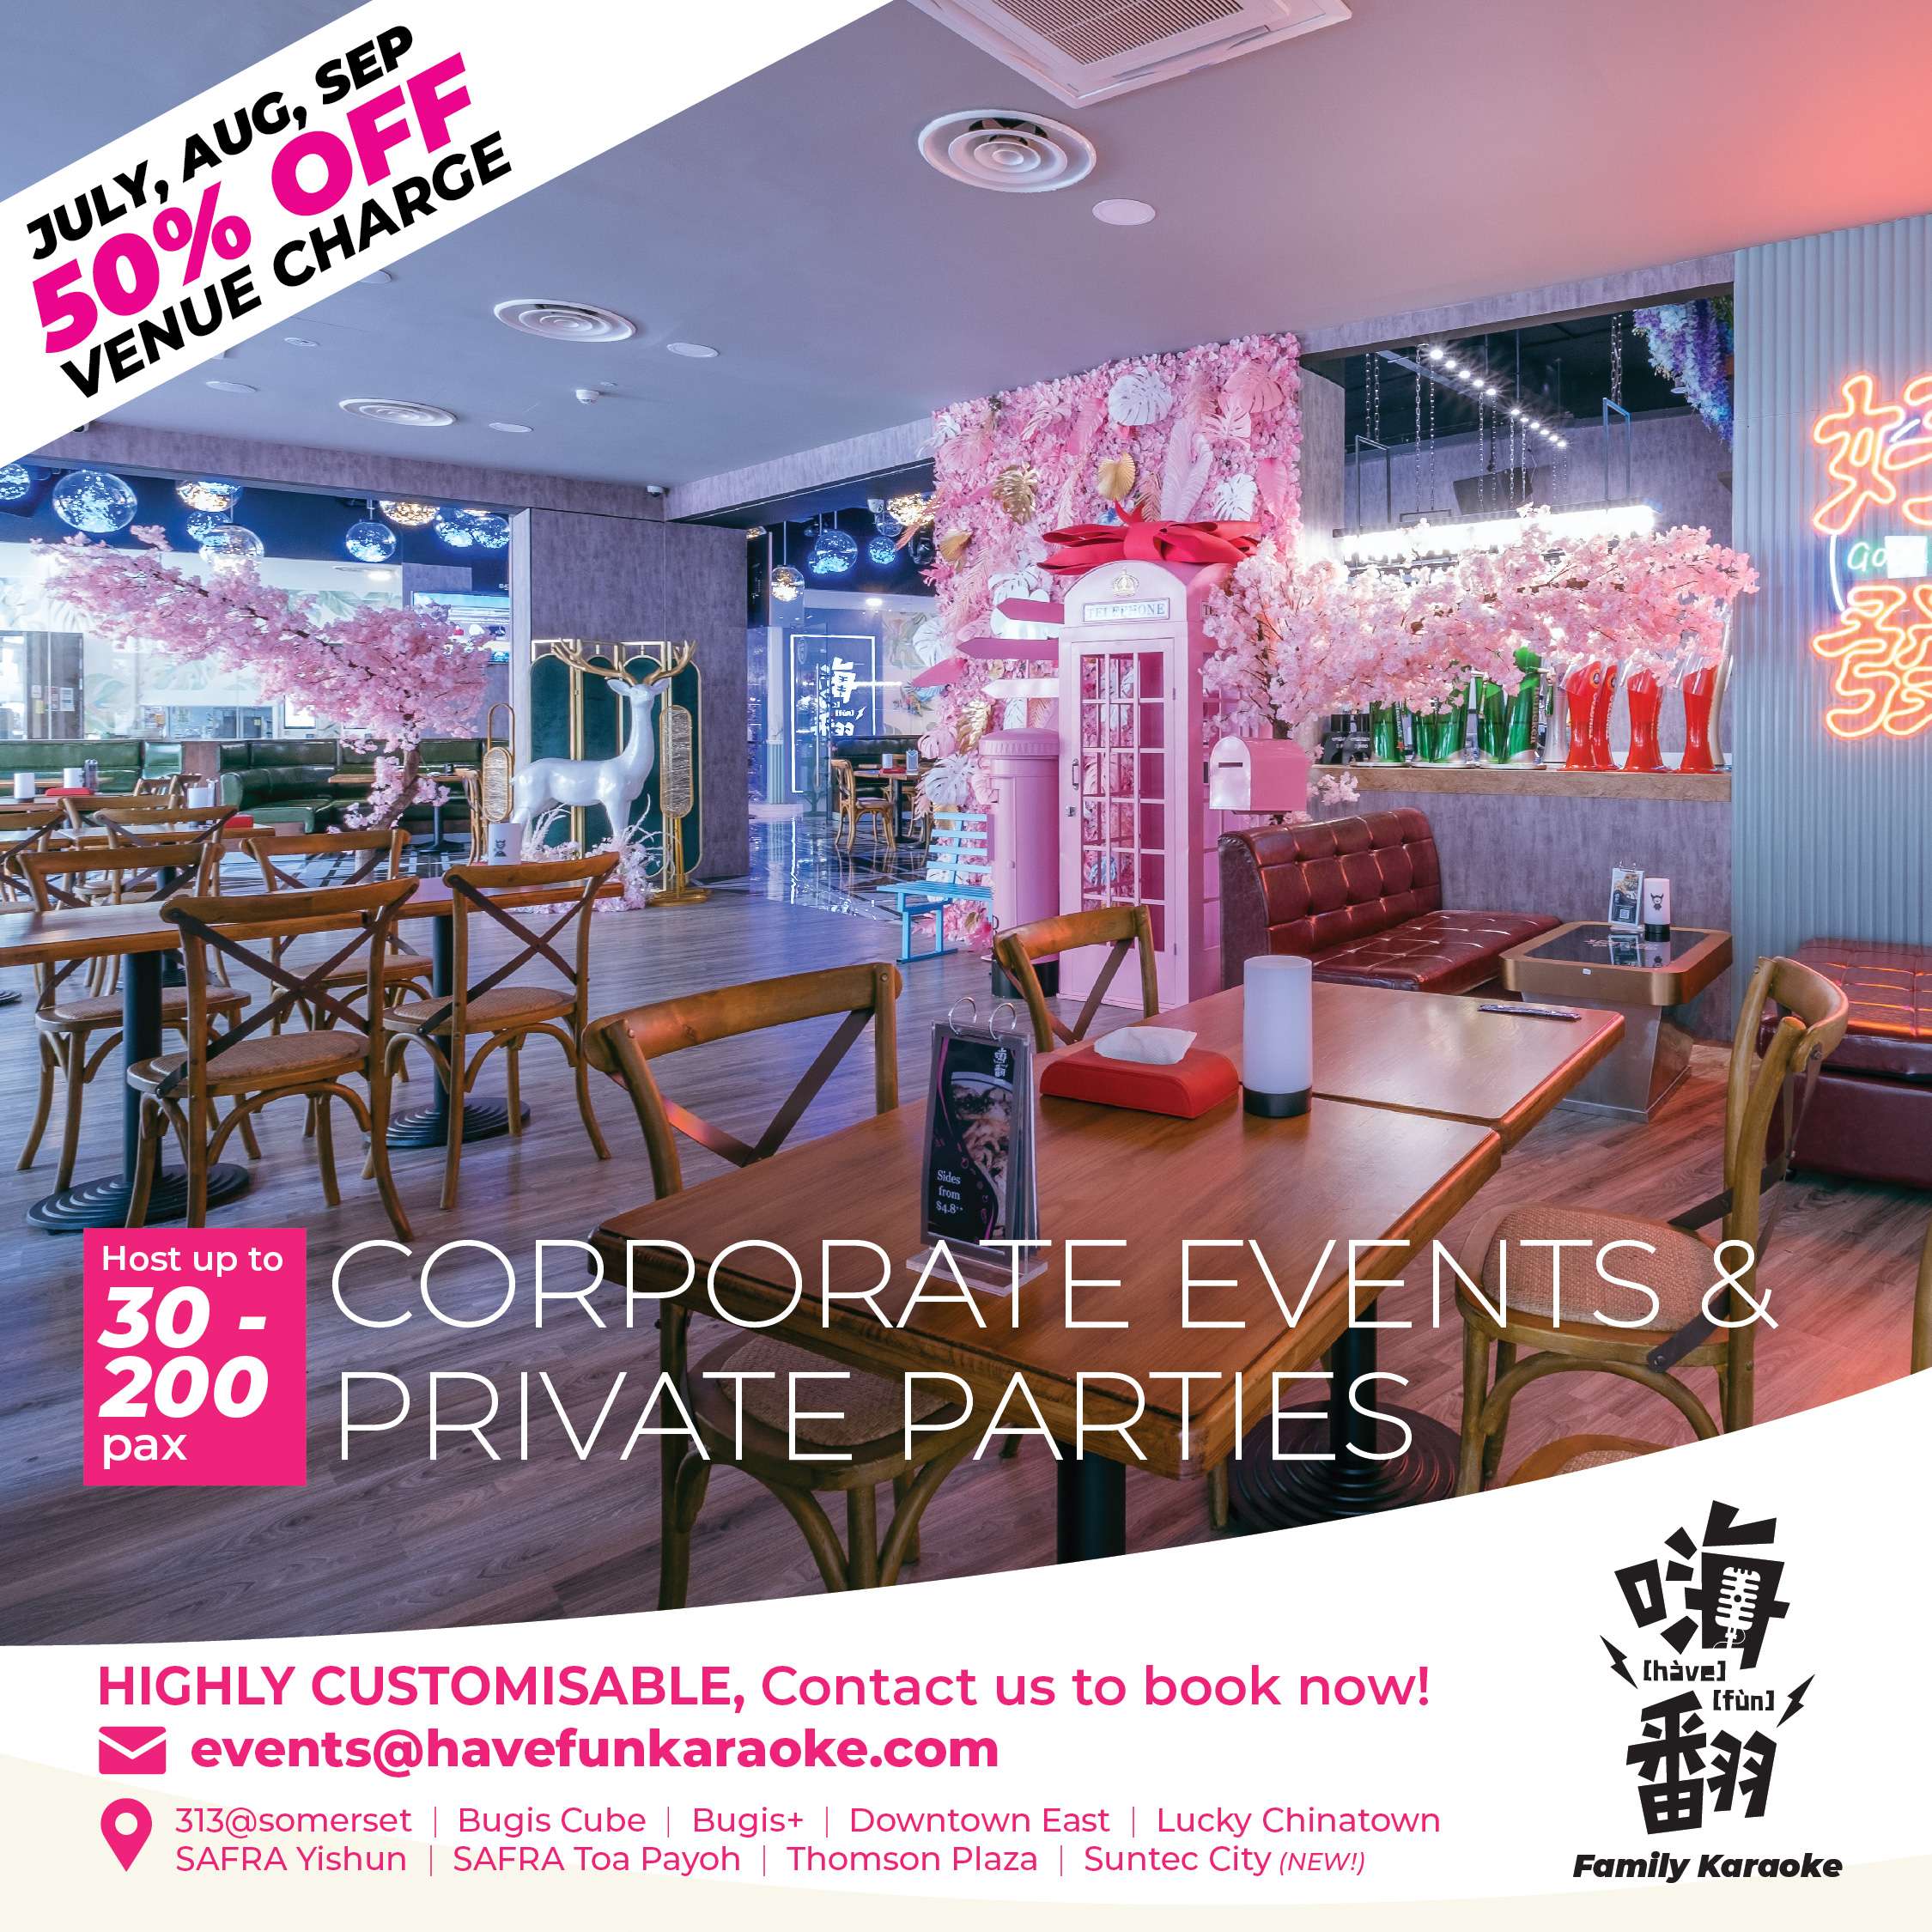 corporate events and private parties with karaoke